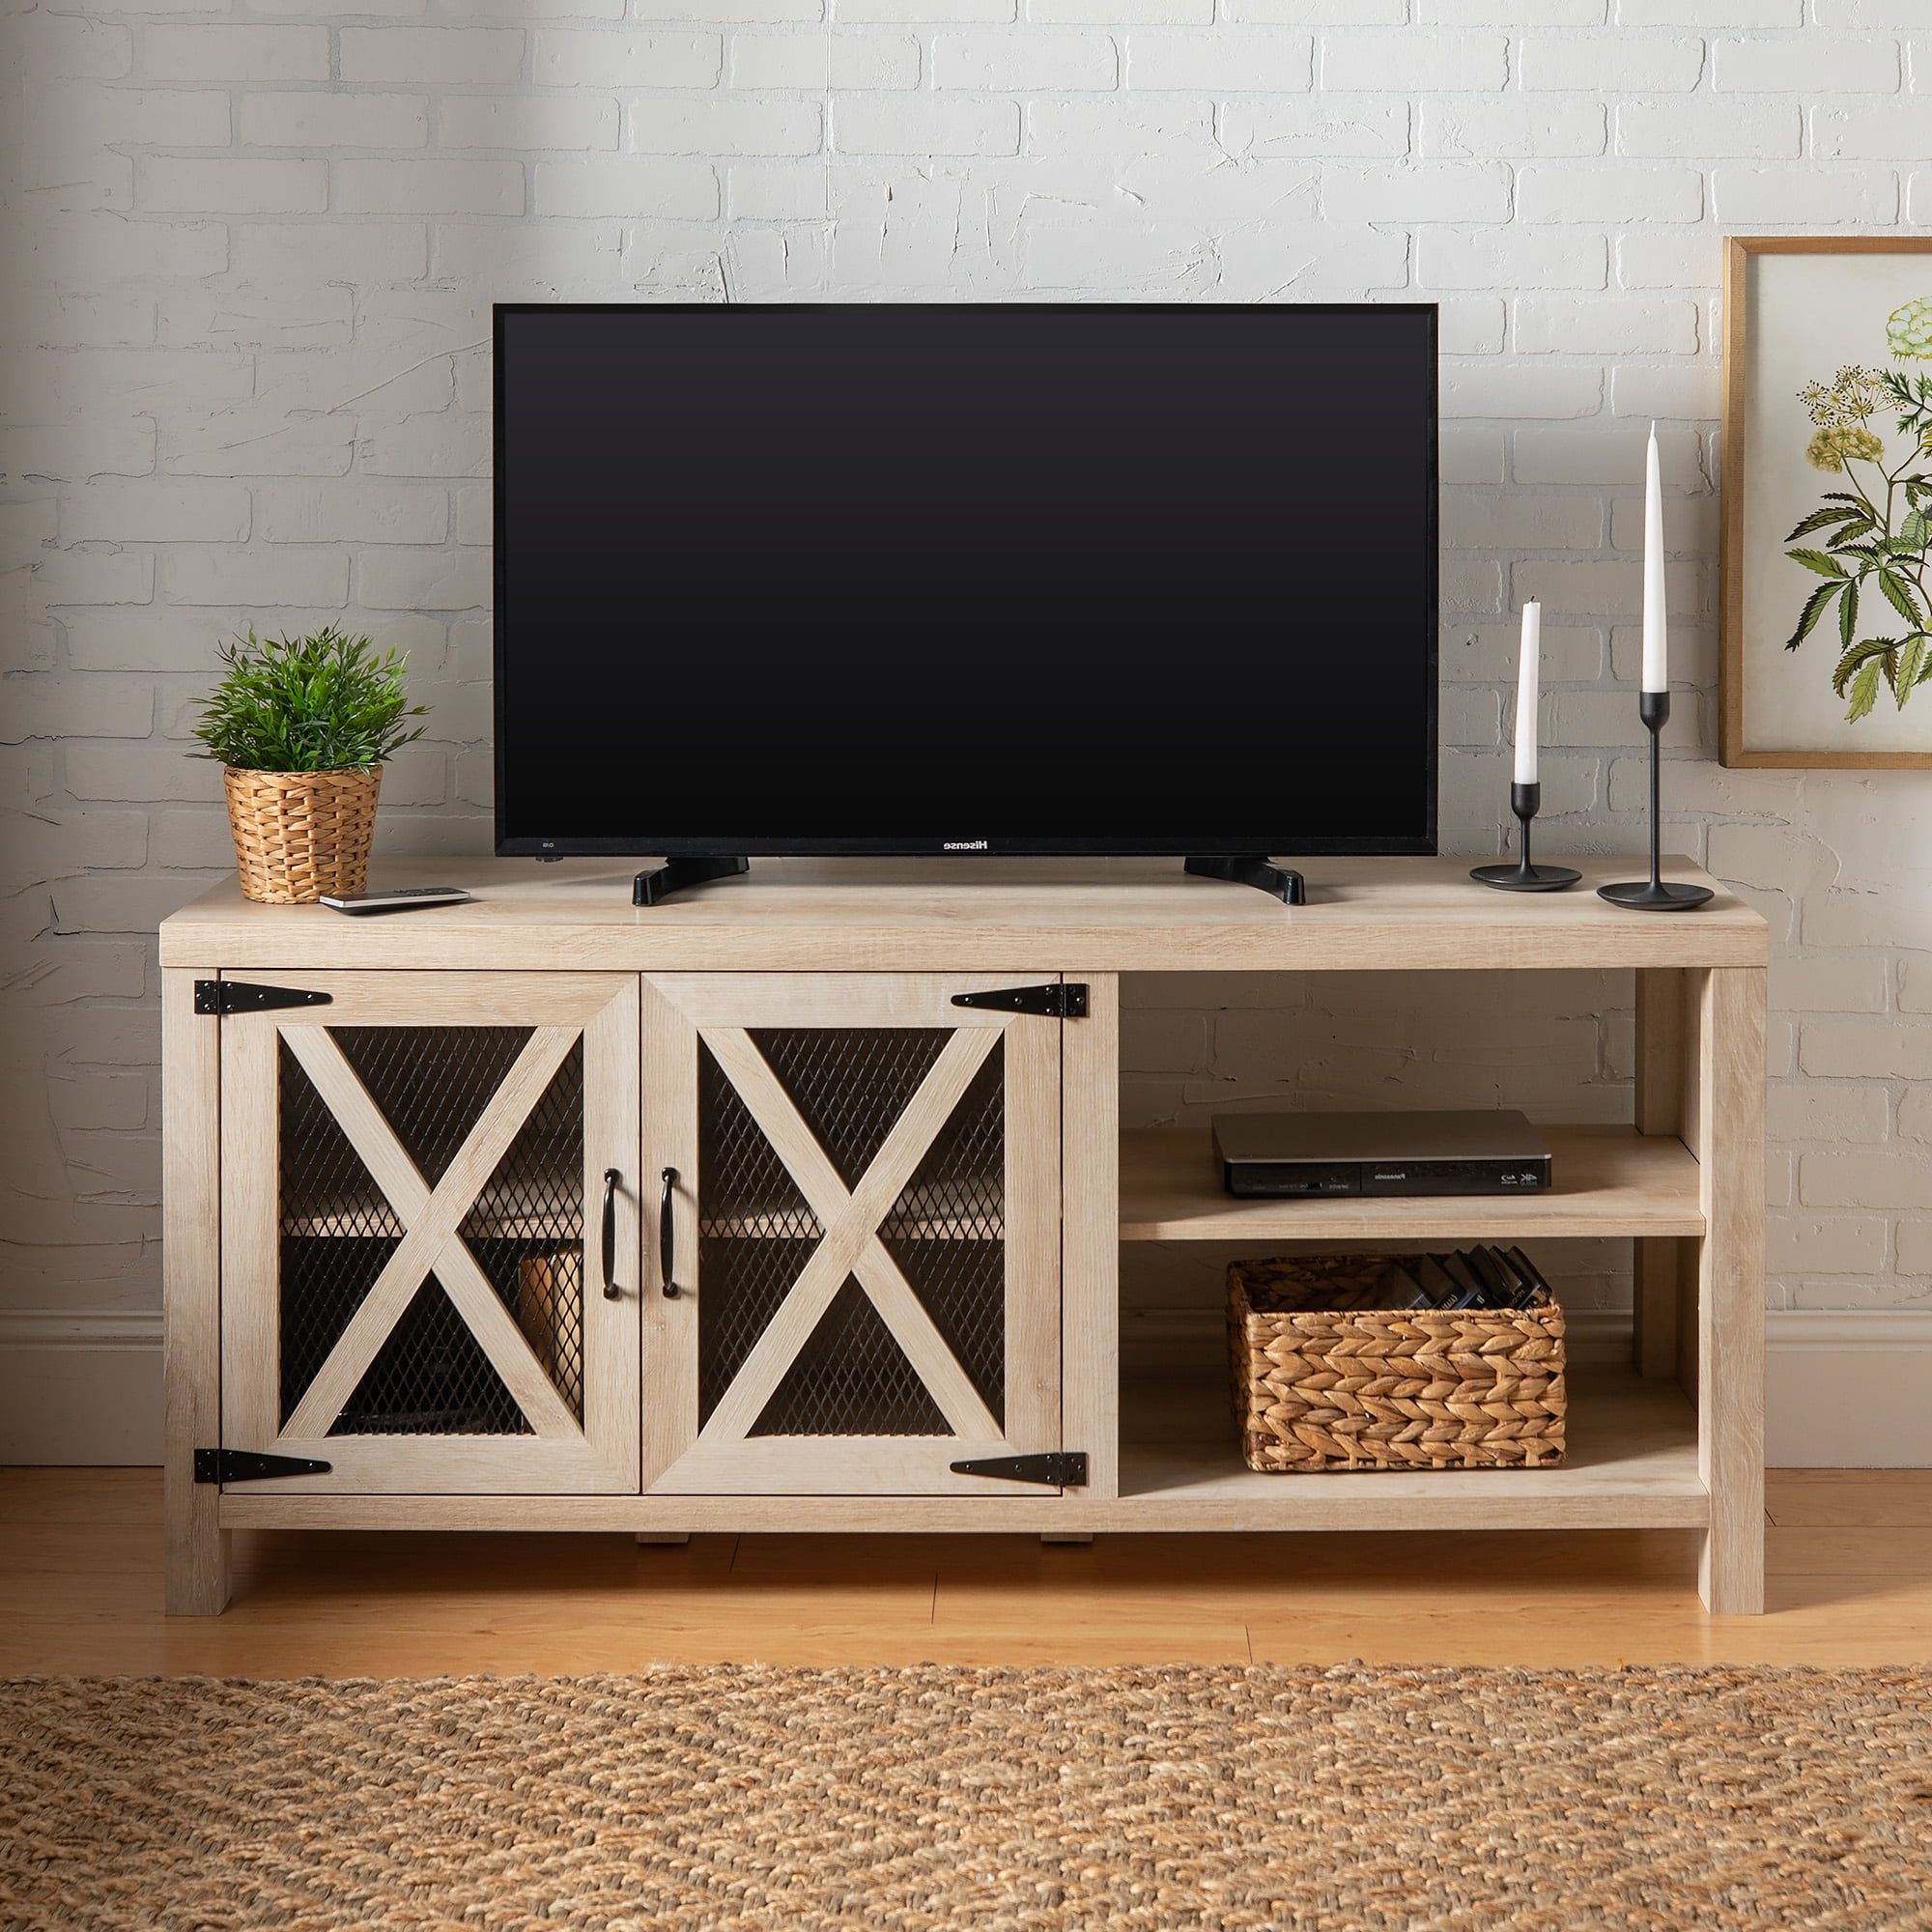 Trendy Farmhouse Stands For Tvs Pertaining To Manor Park Industrial Farmhouse Tv Stand For Tvs Up To 64" – White Oak (View 3 of 15)